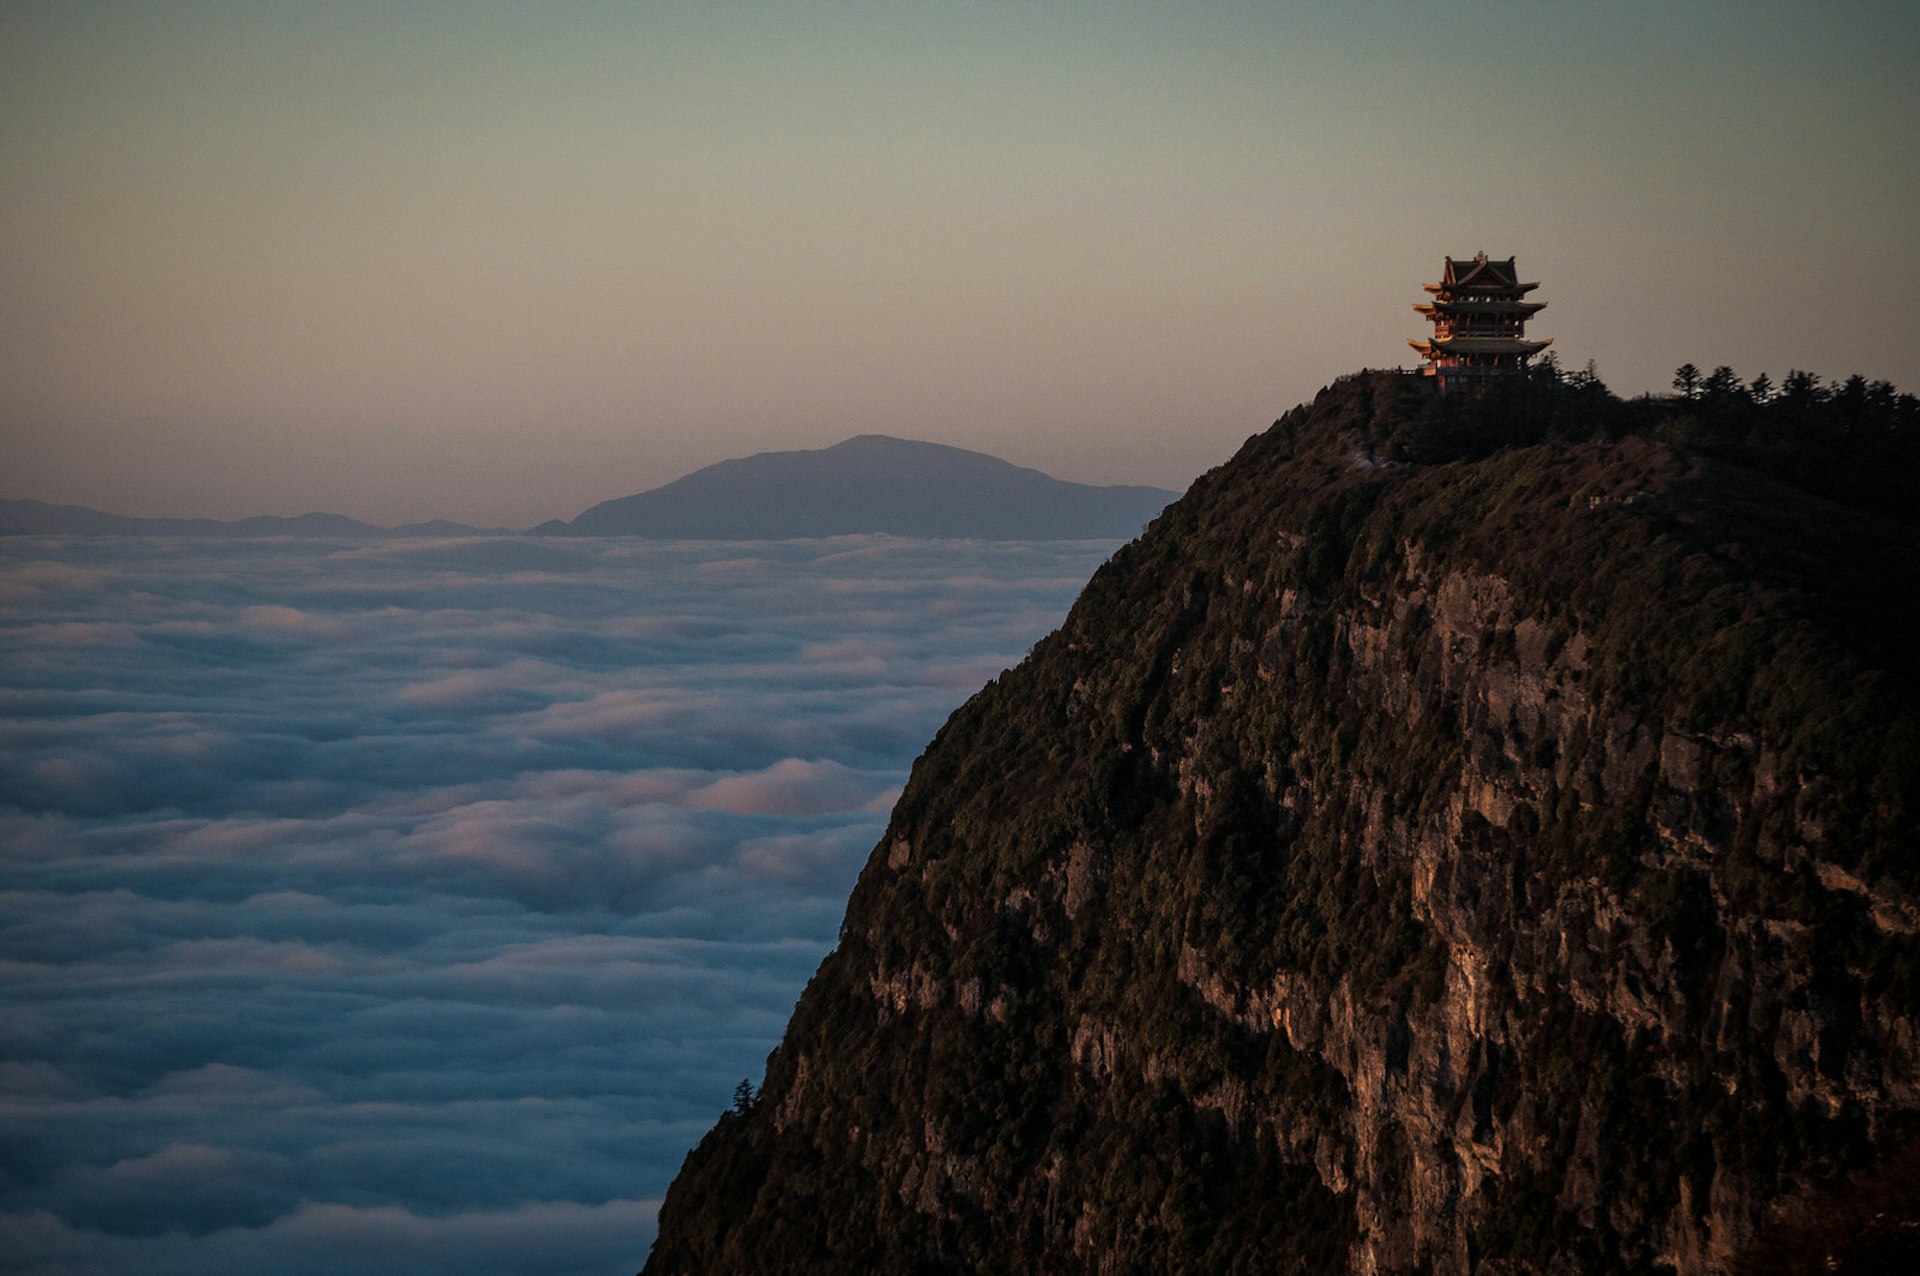 The summit of Éméi Shān above the cloud line. A lone temple stands near the summit, cast into shadow by the setting sun.